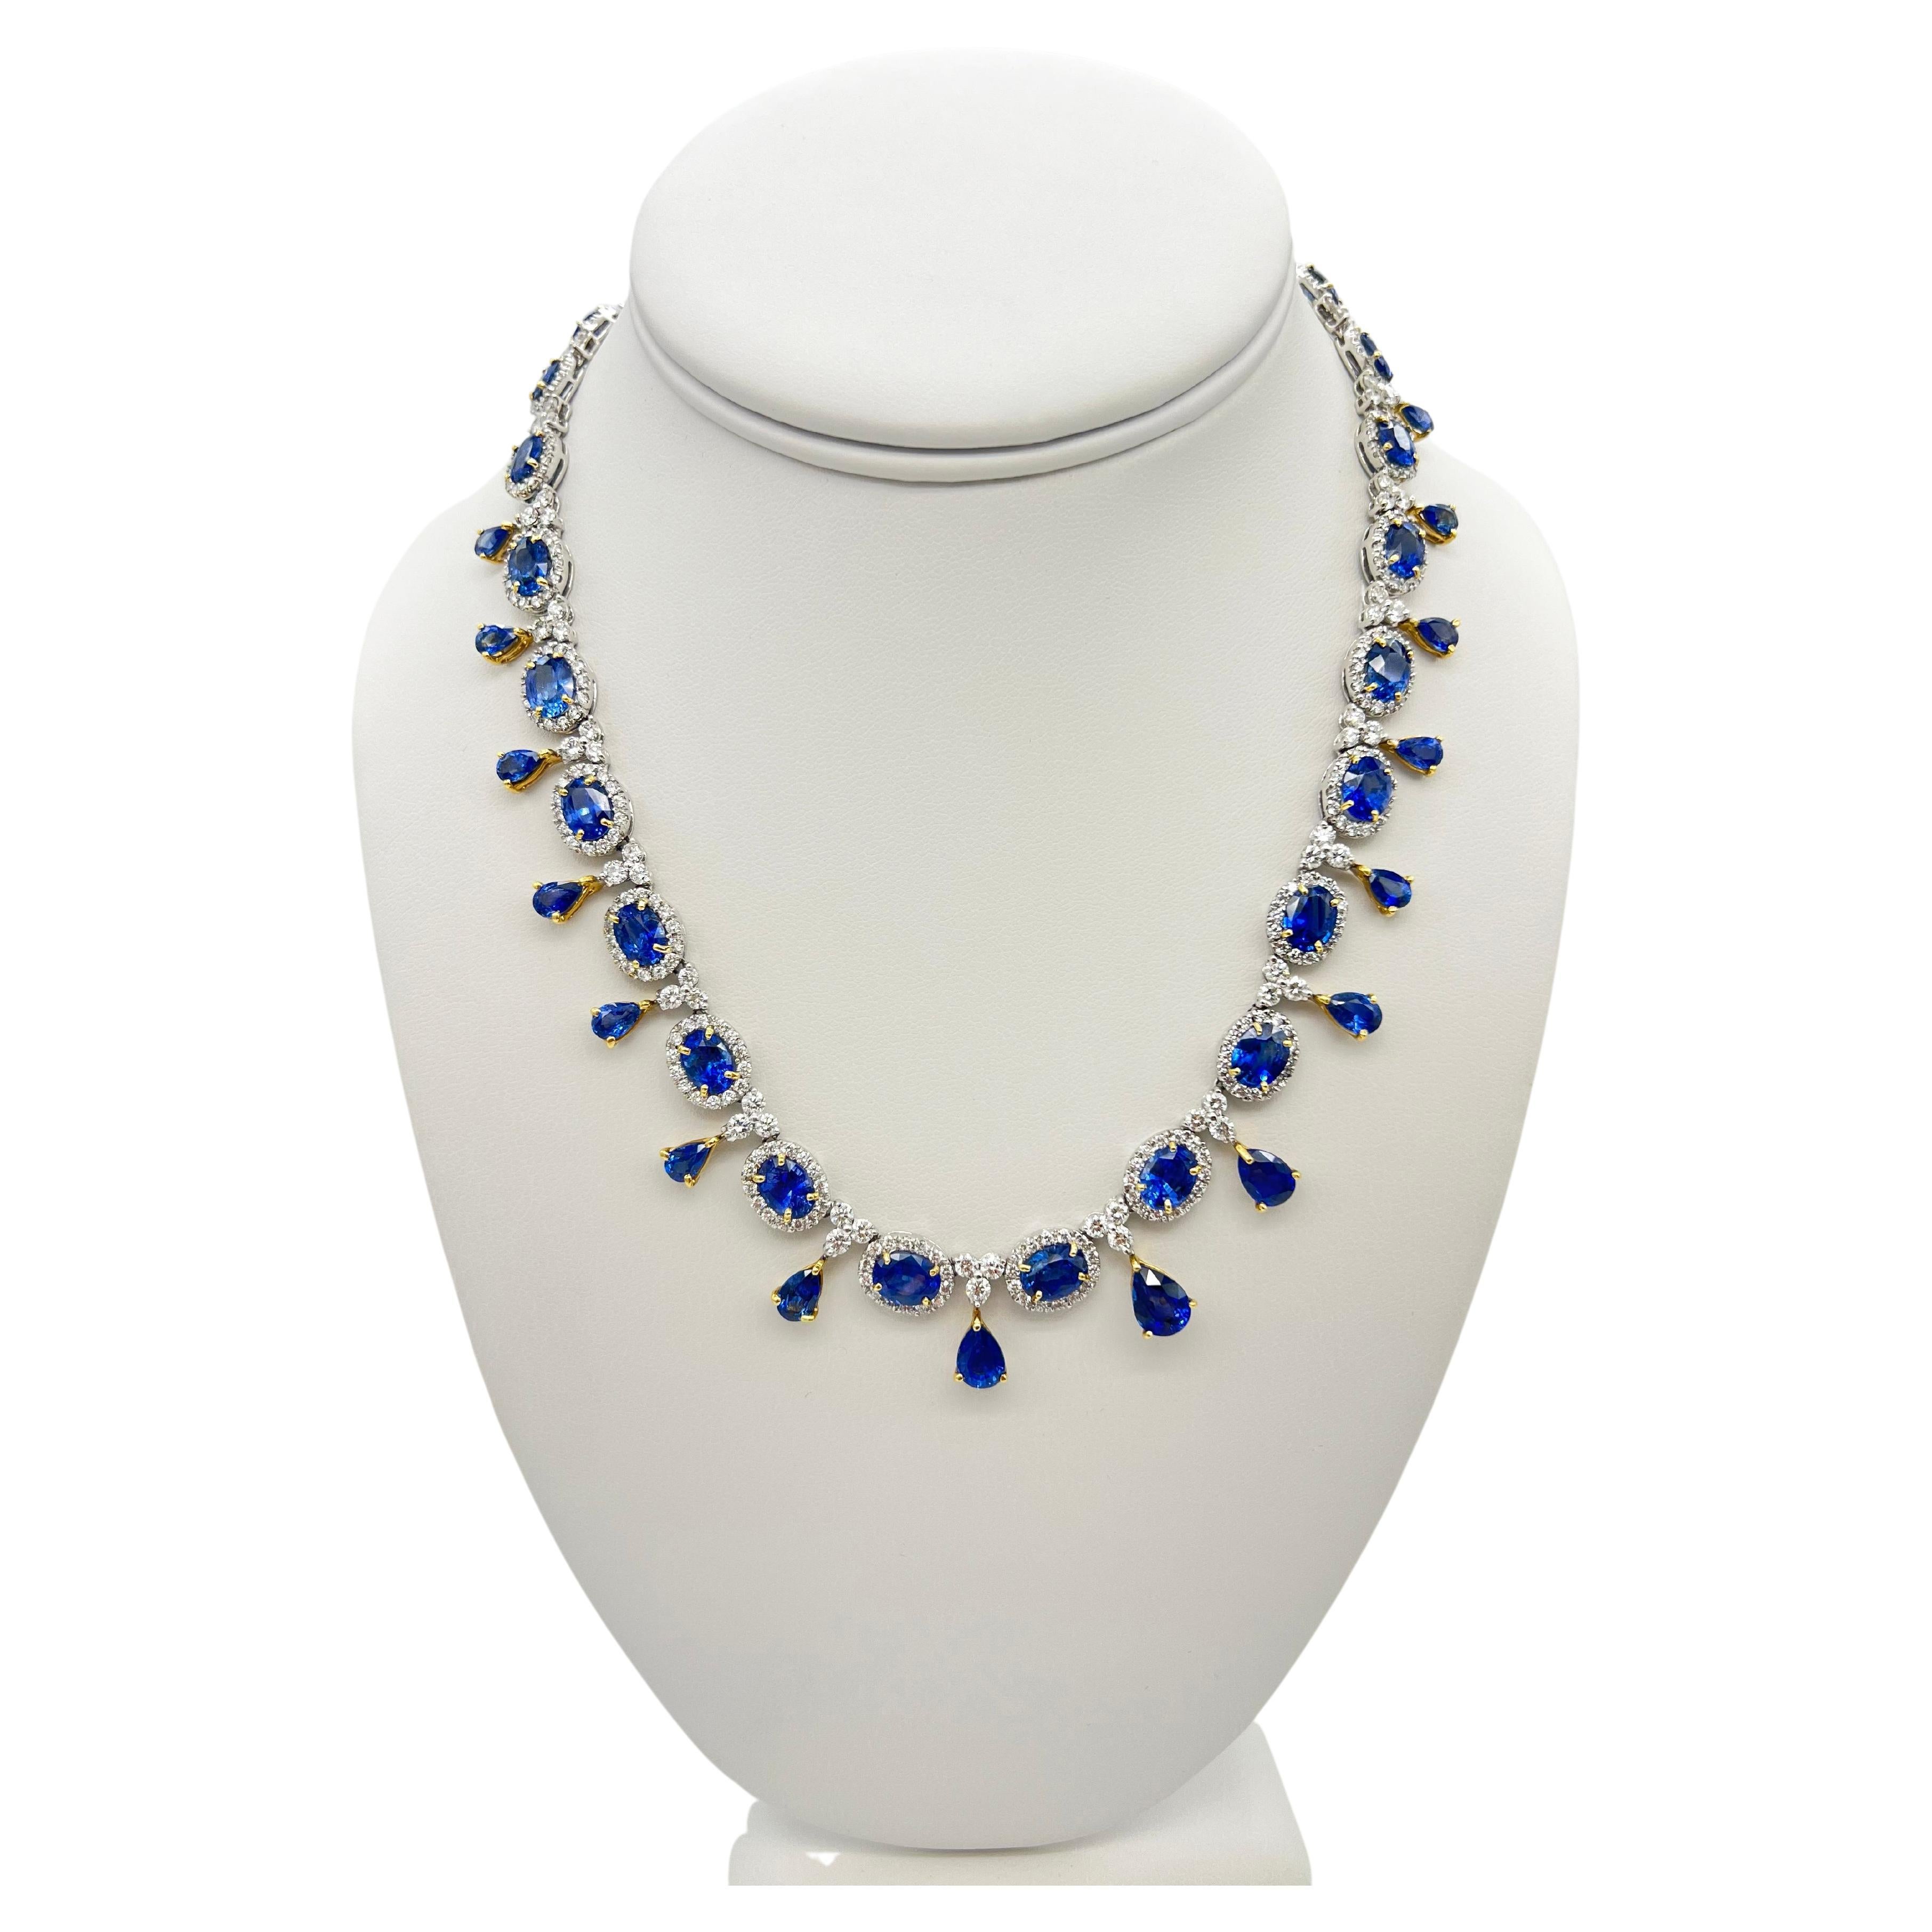 This collar necklace is the definition of regality. It is designed to dazzle when laid on the décolletage of a woman. Delicate yet bold, elegant and sophisticated, it screams royalty for the wearer. Paired with an off-shoulder dress or lower